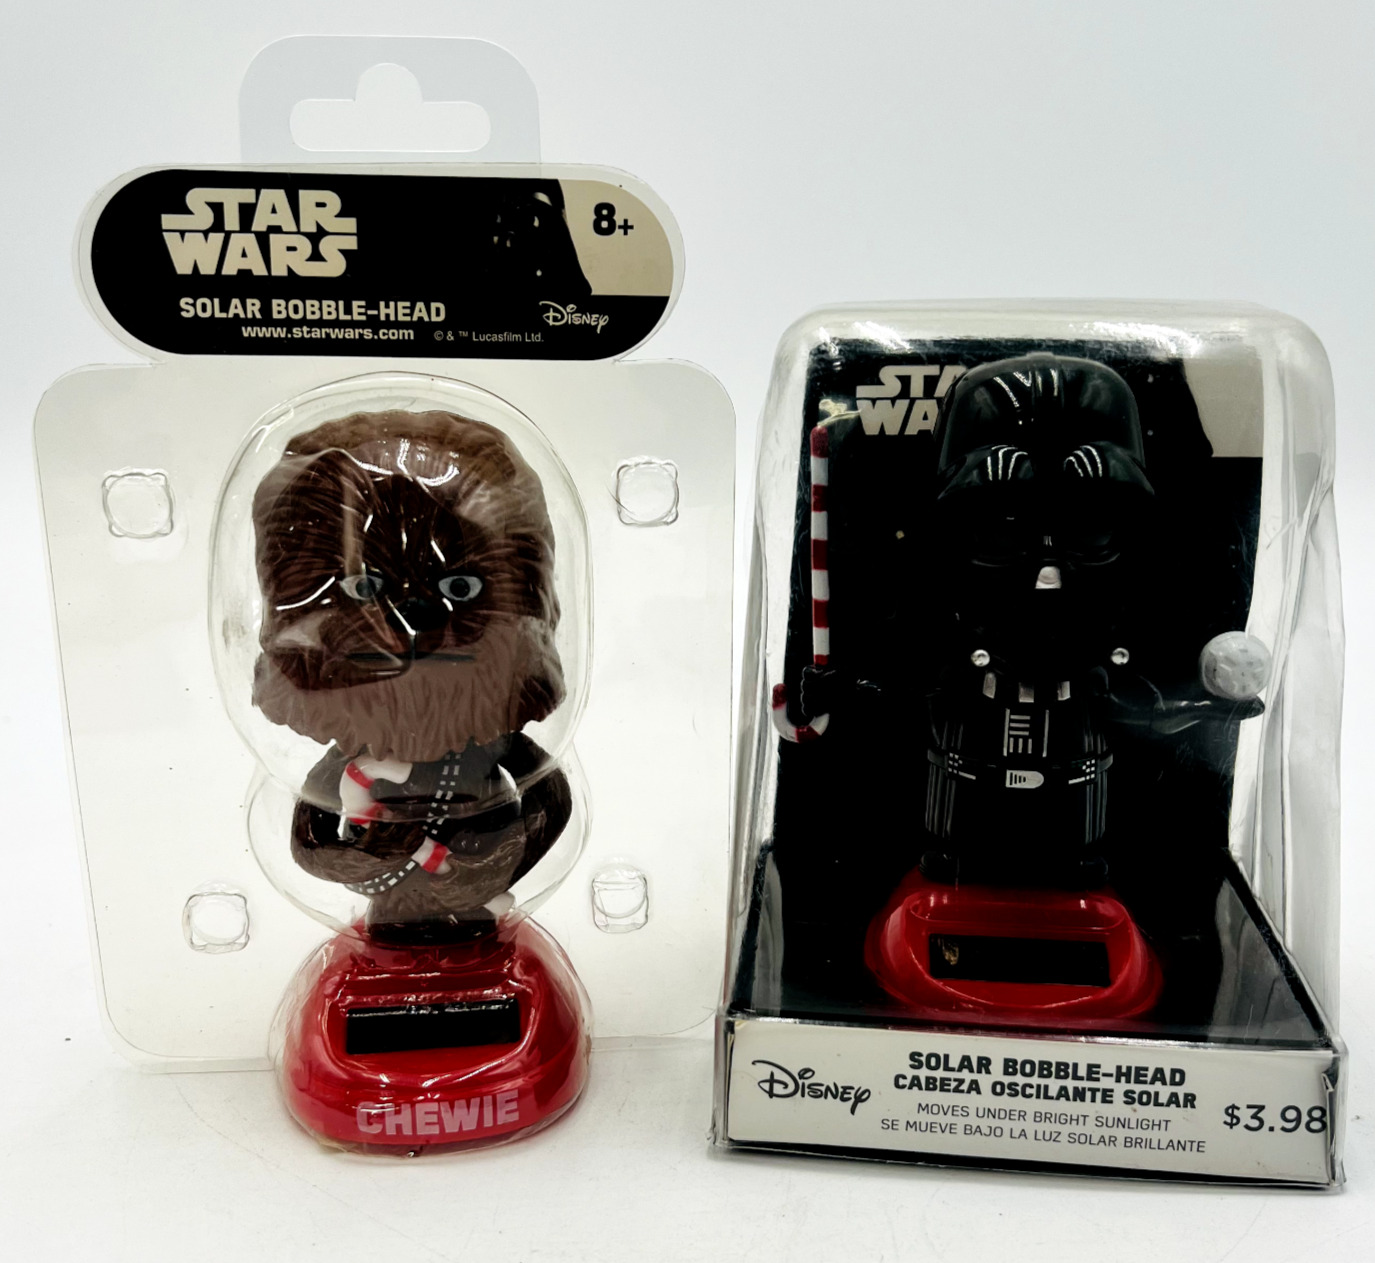 New Never Opened.  Darth Vader and Chewbacca Disney Solar Bobblehead 2018